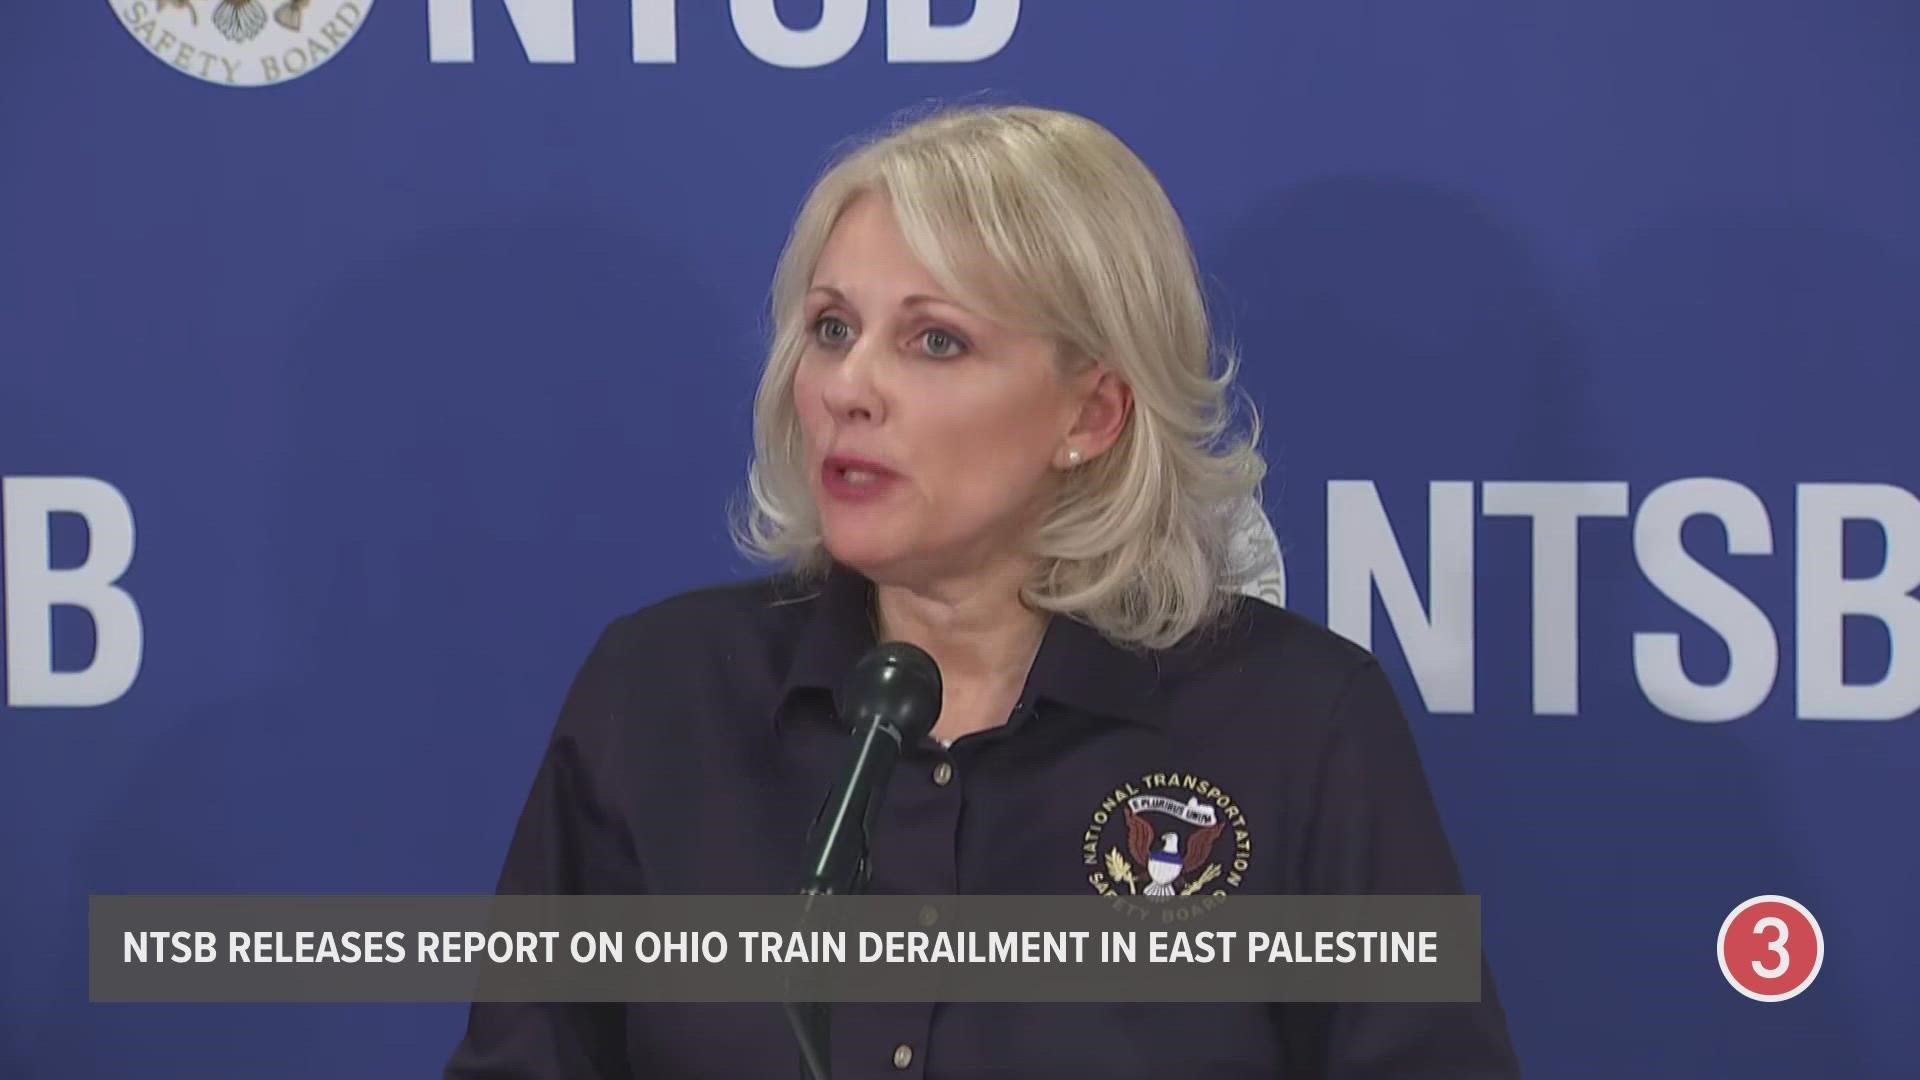 During a press briefing on Thursday, NTSB Chair Jennifer Homendy issued a plea for people to keep politics out of the train derailment in East Palestine.